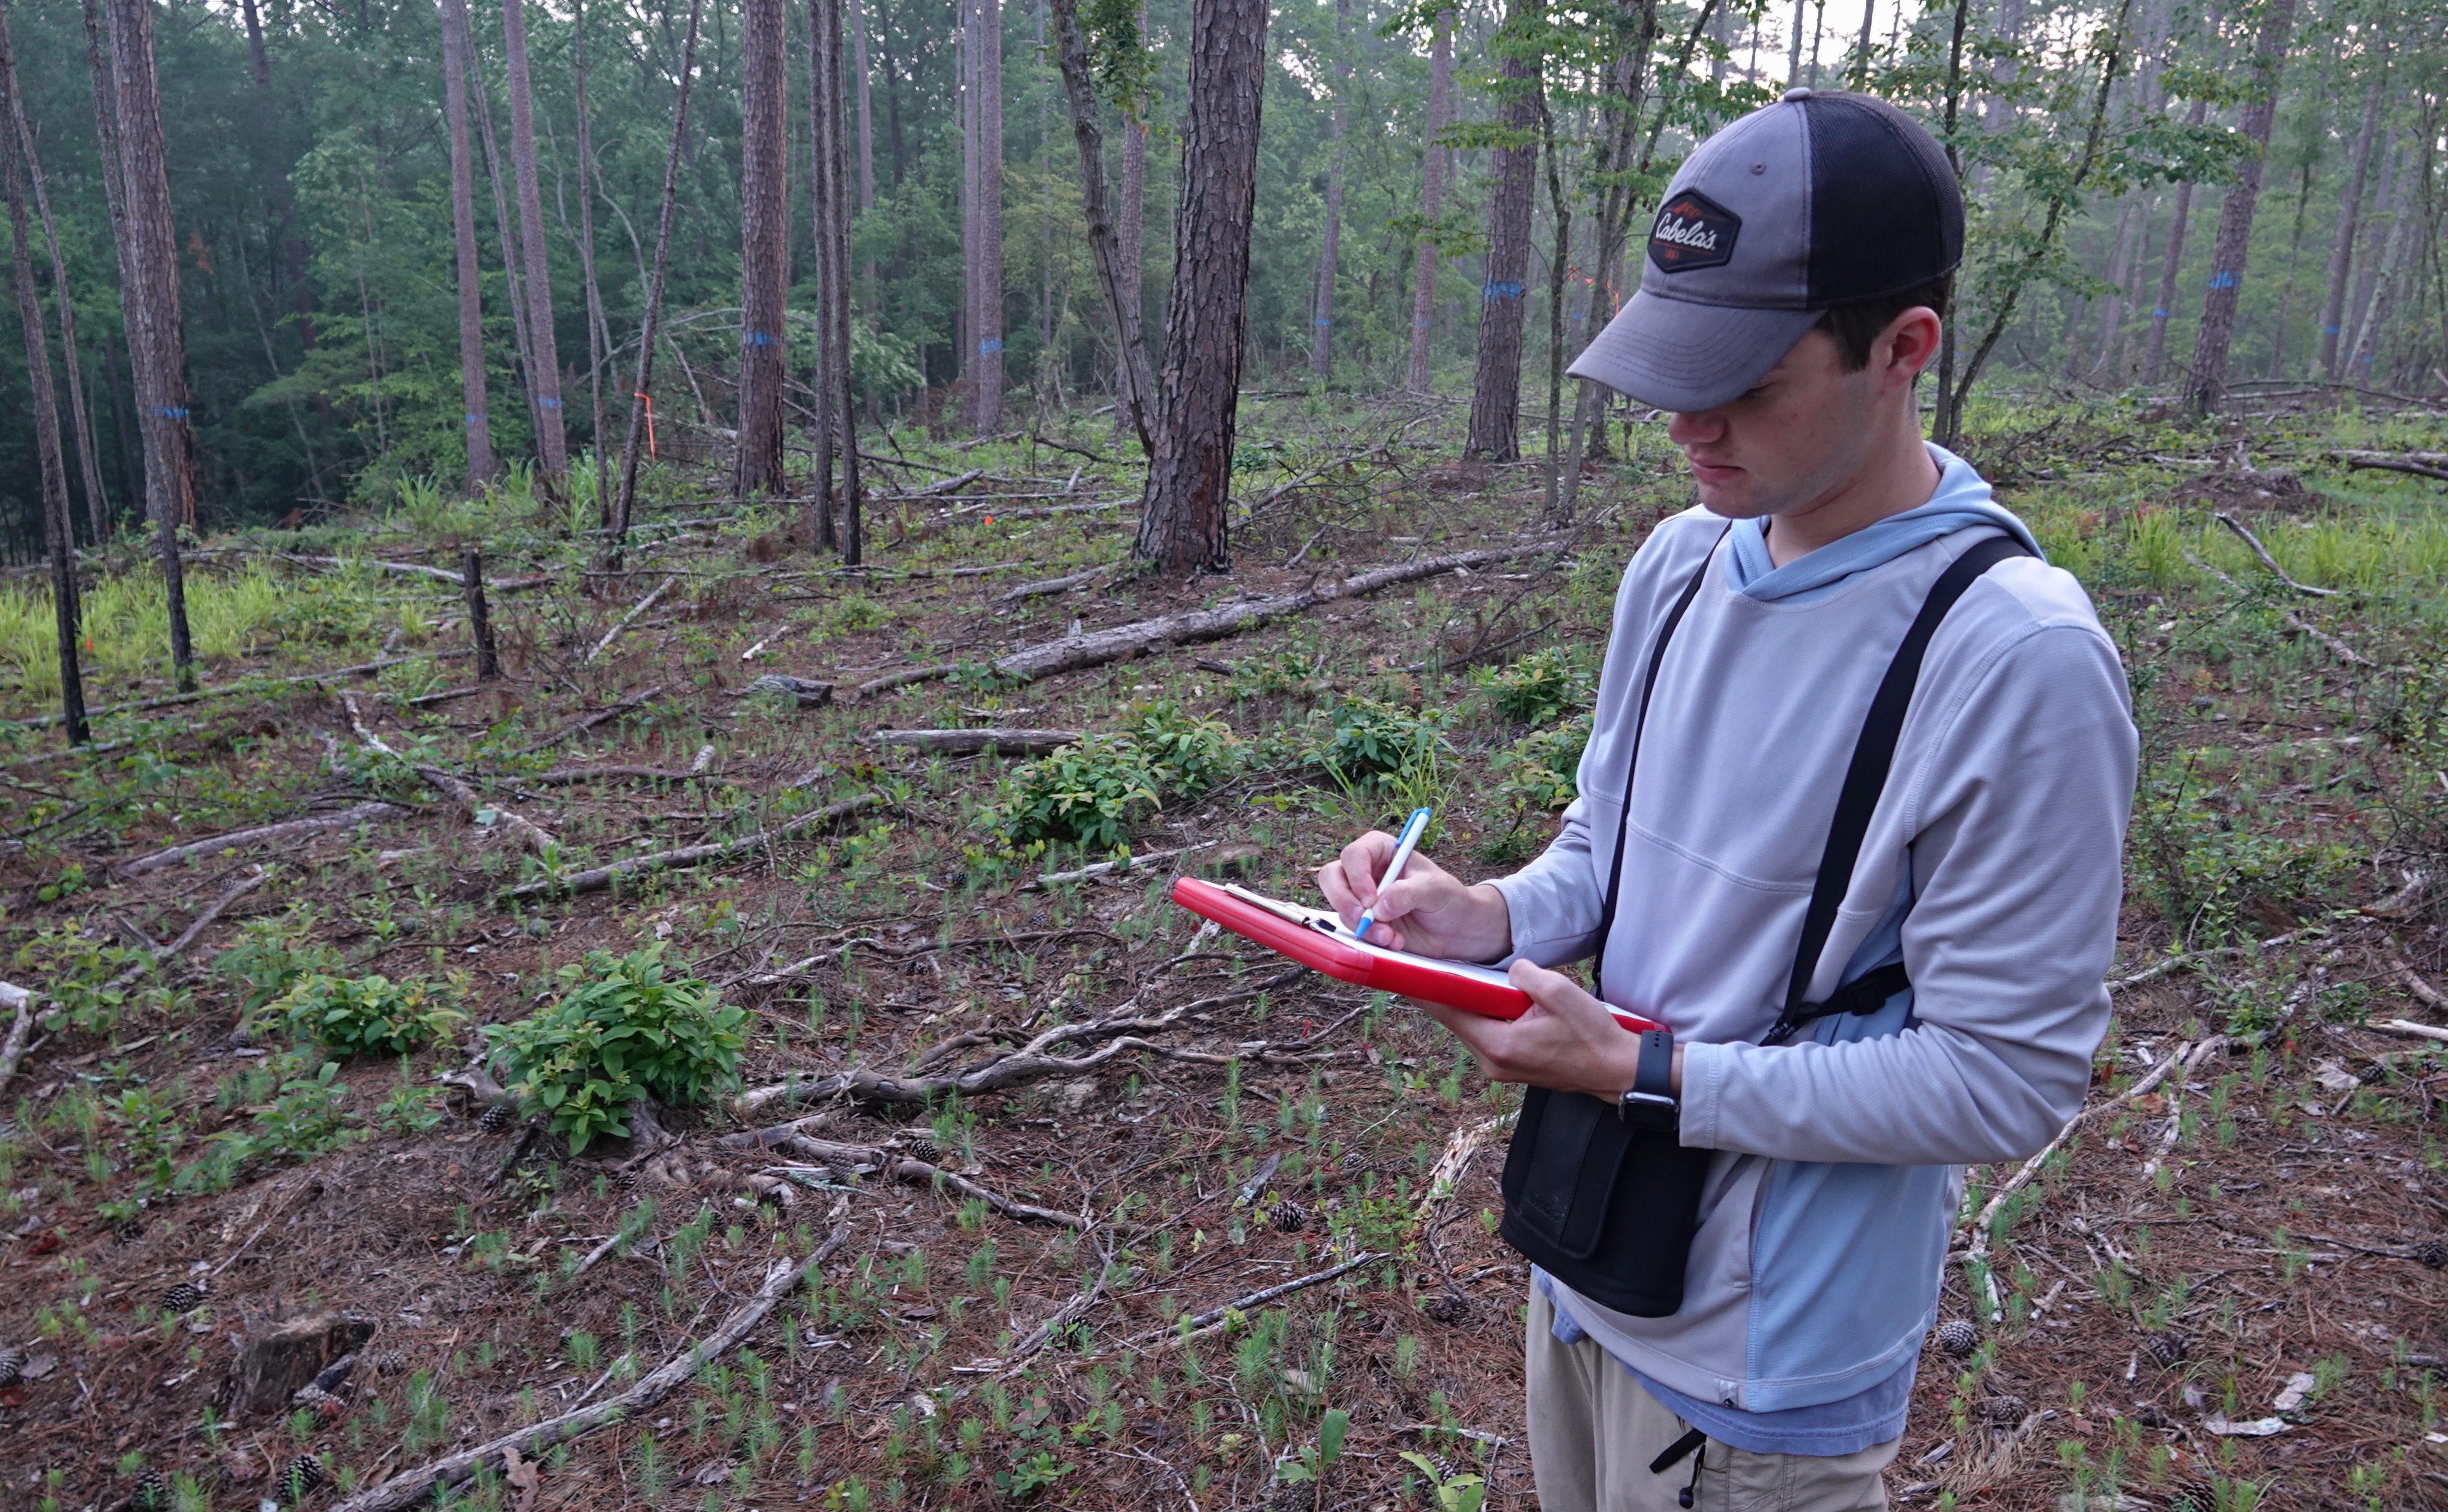 Researcher conducting a point count in a pine forest